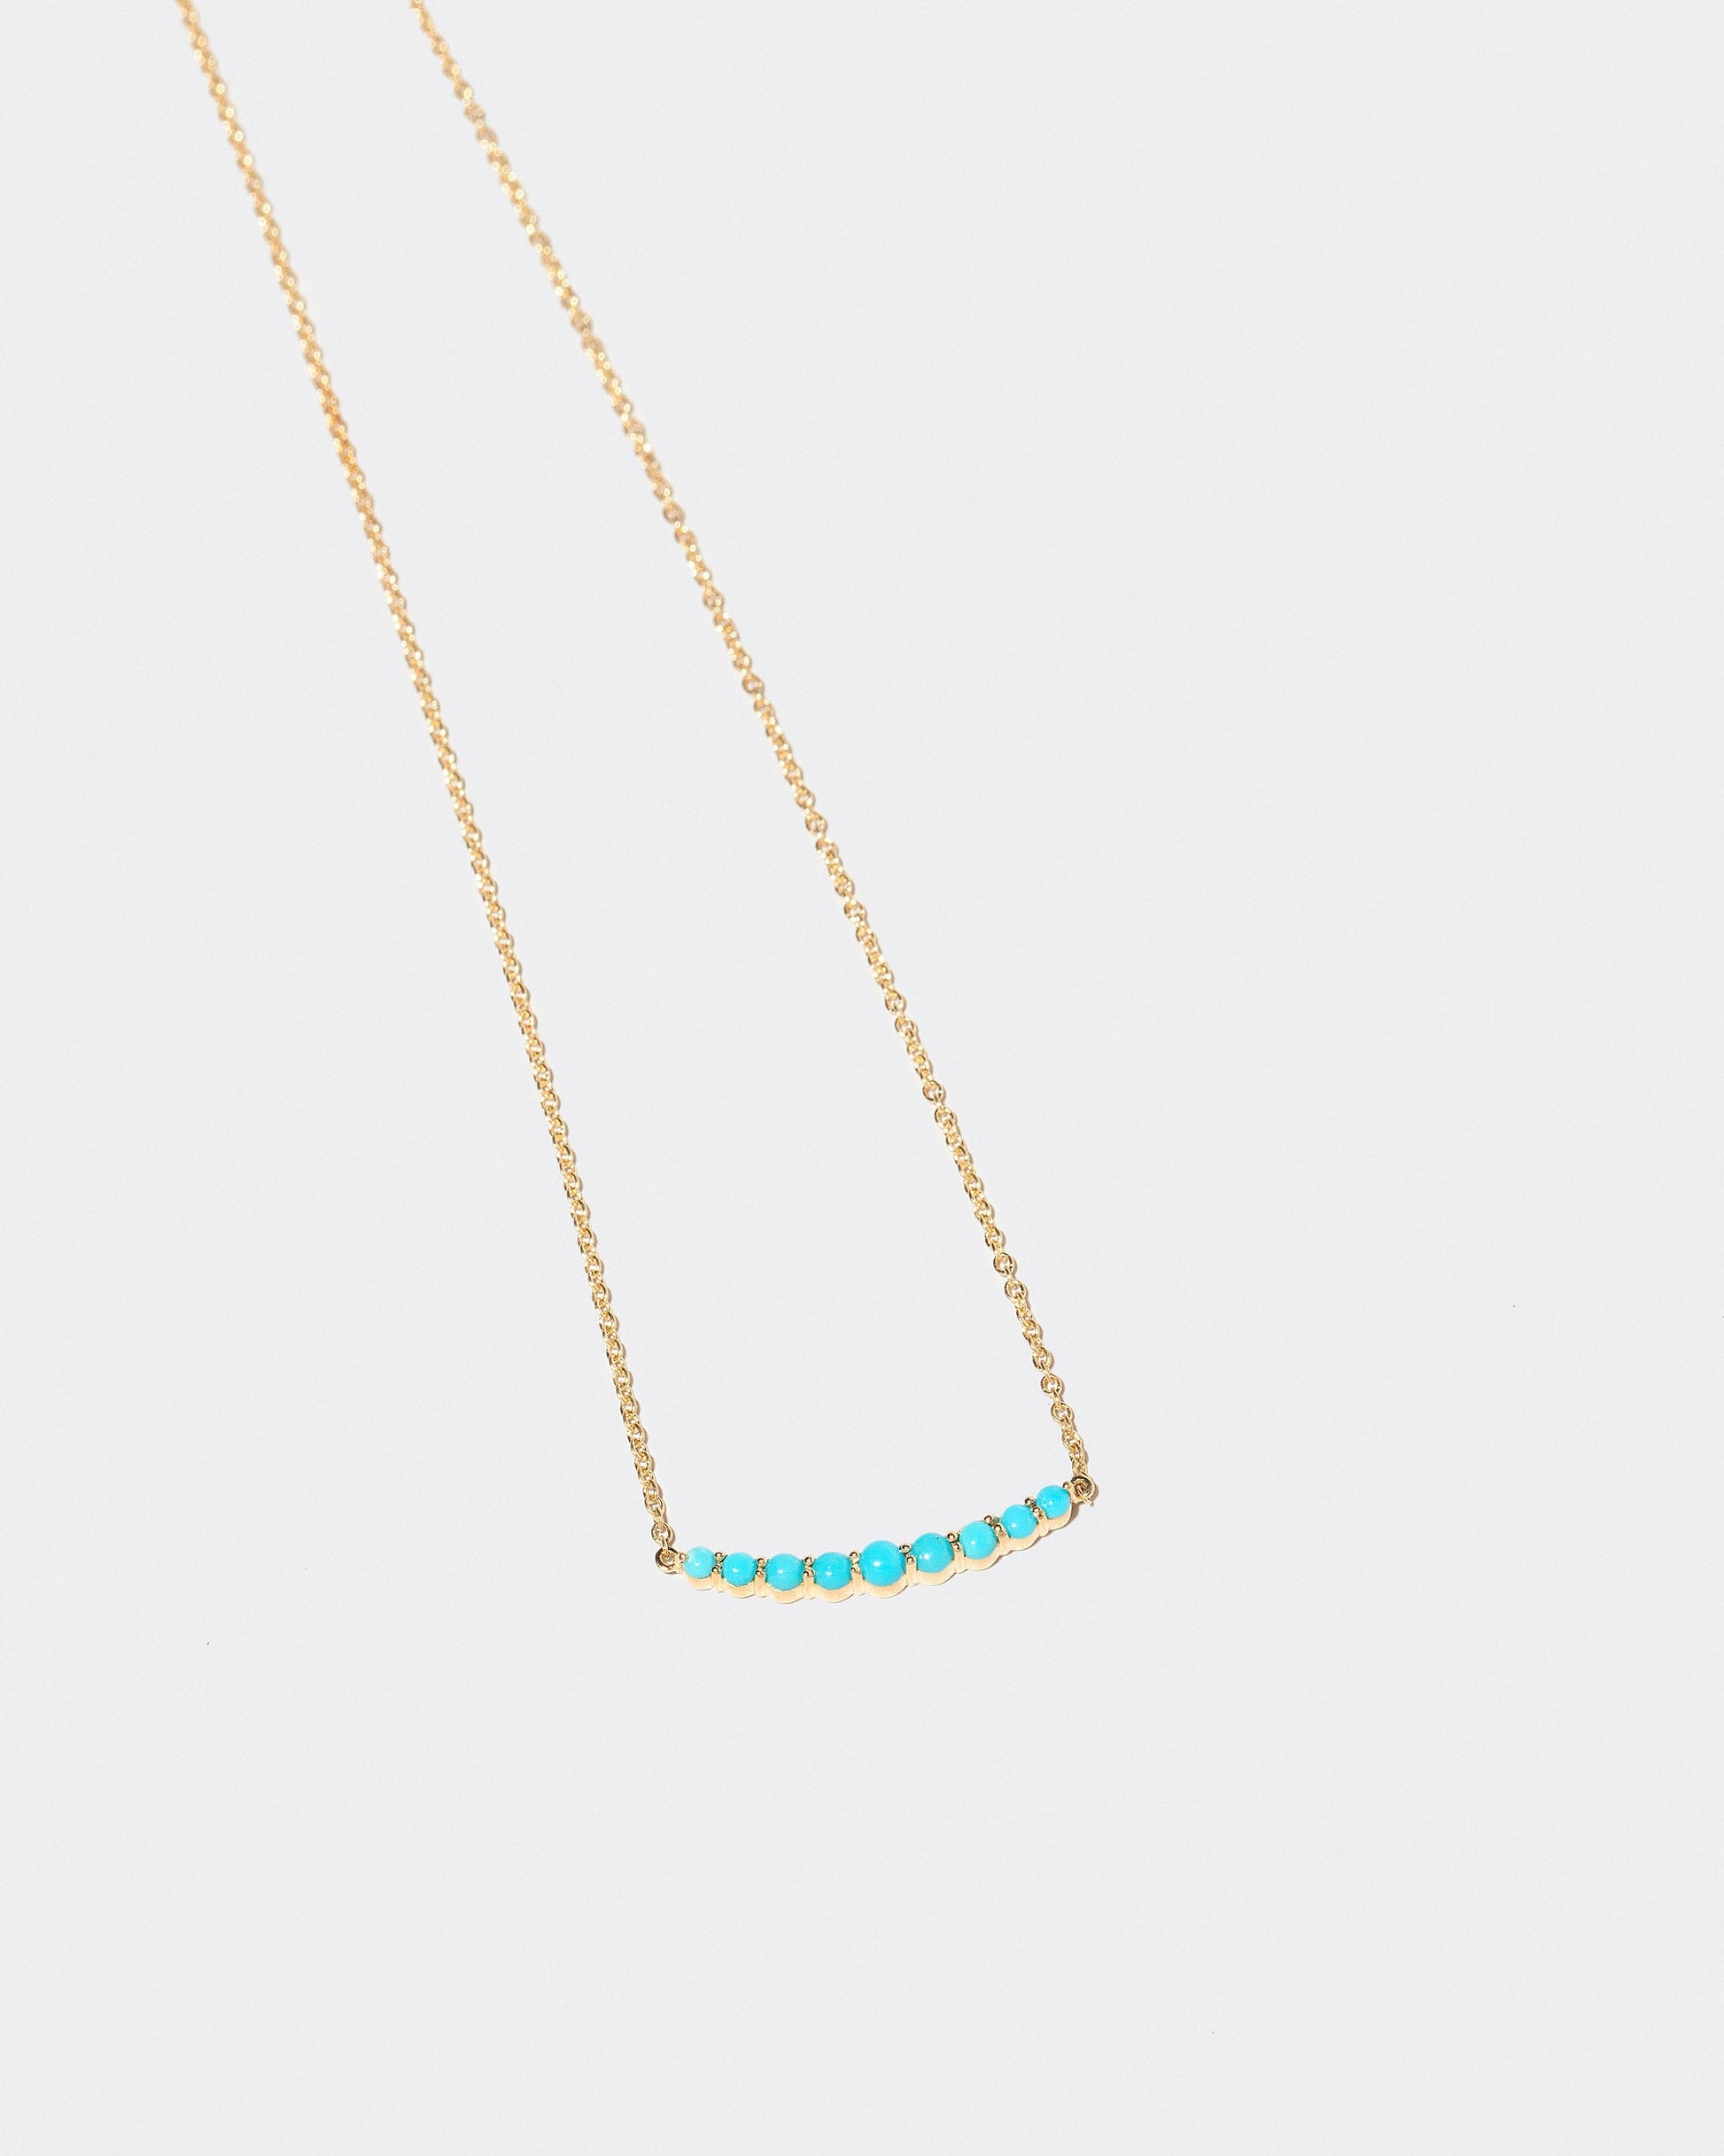 Closeup detail of the Turquoise Crescent Necklace on light color background.